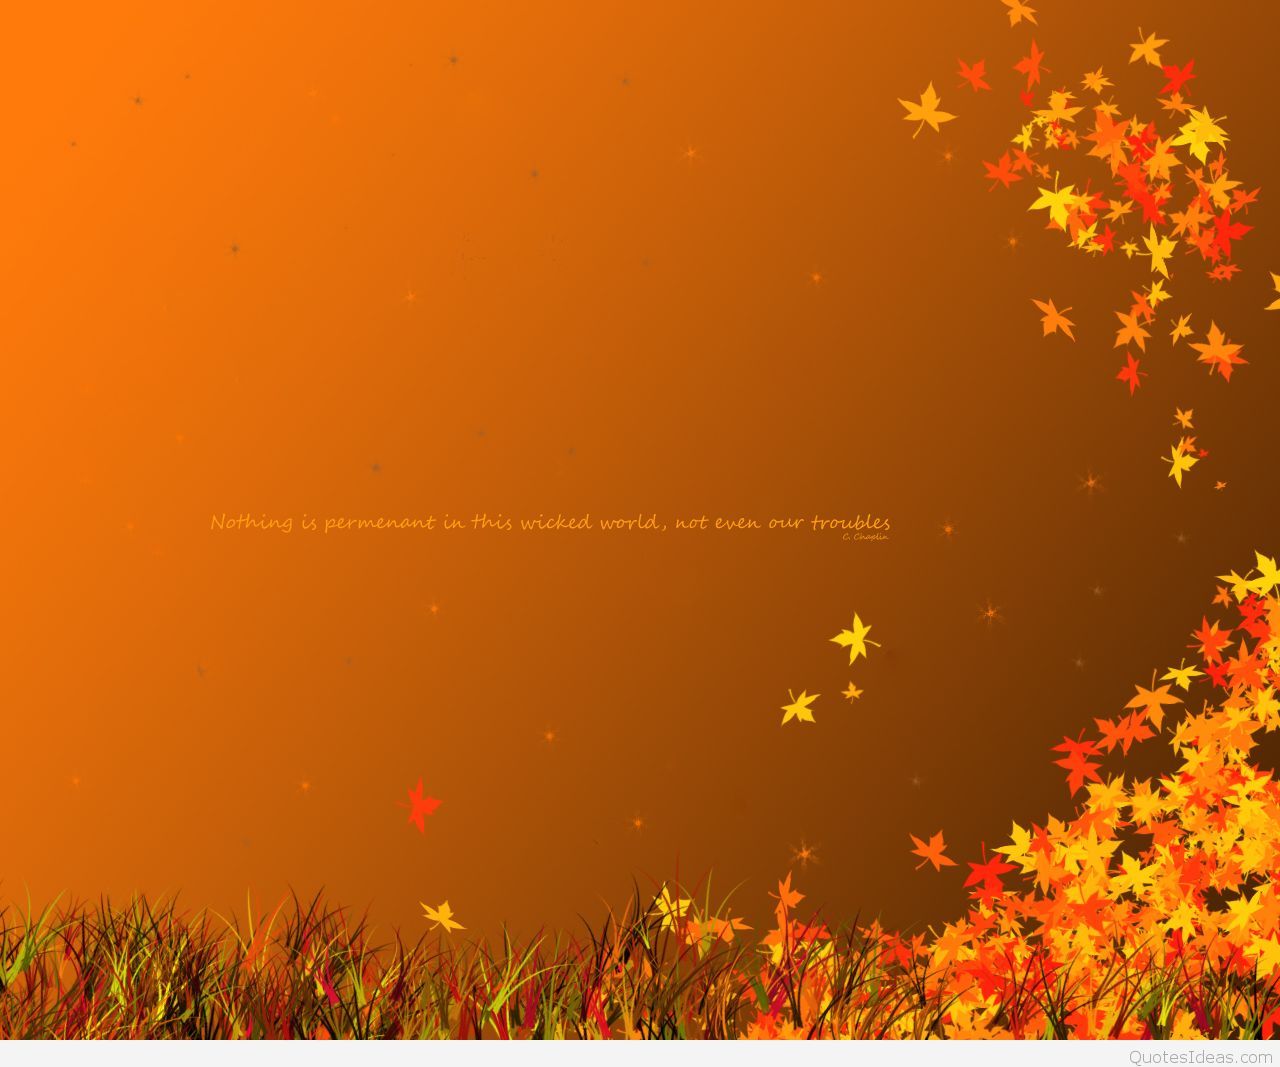 Best Autumn wallpaper quotes, sayings, image hd